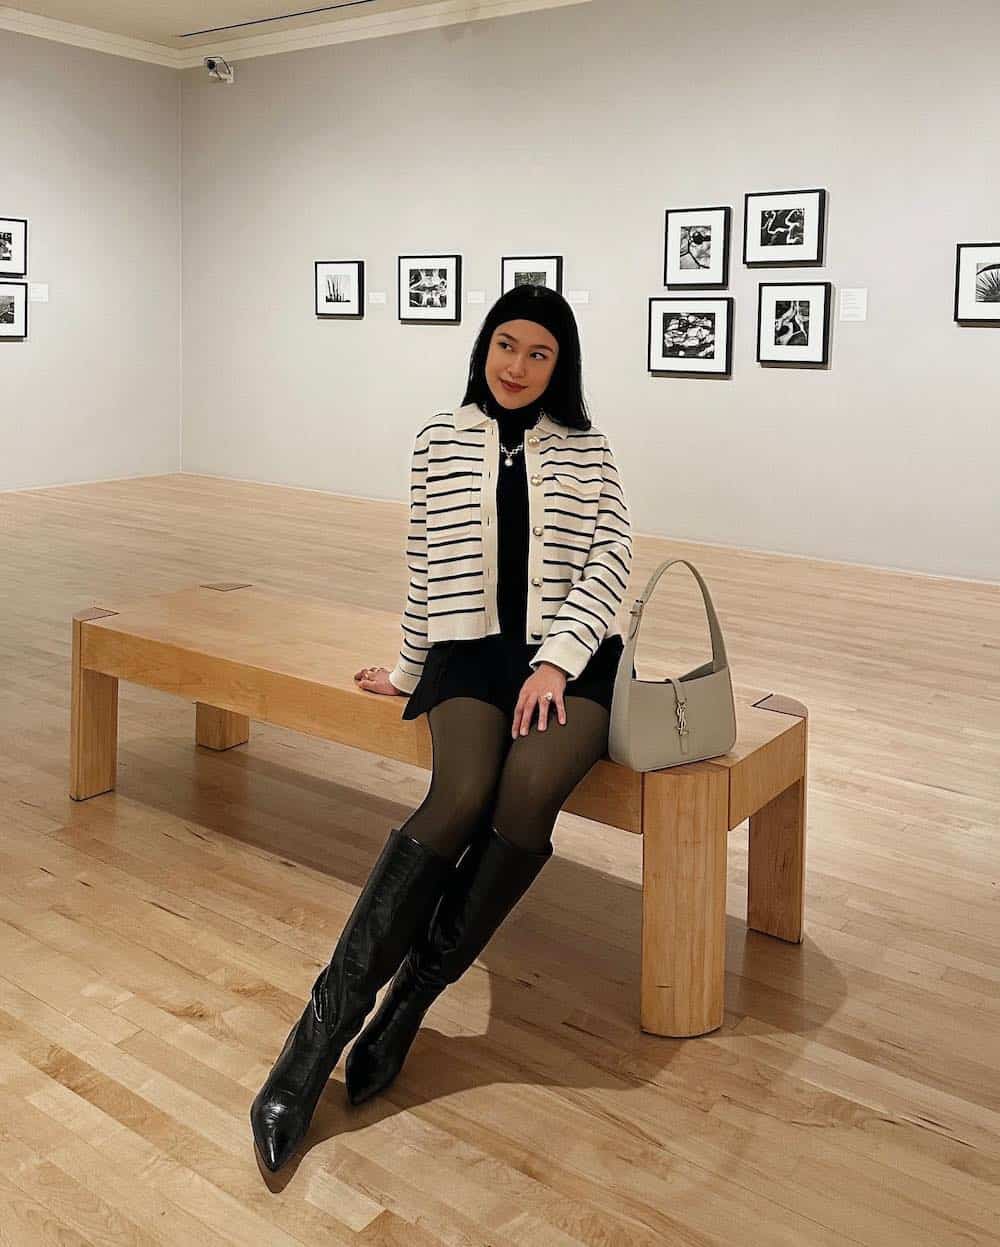 Woman wearing a black dress, tights and tall boots with a white and black and striped sweater in a museum.